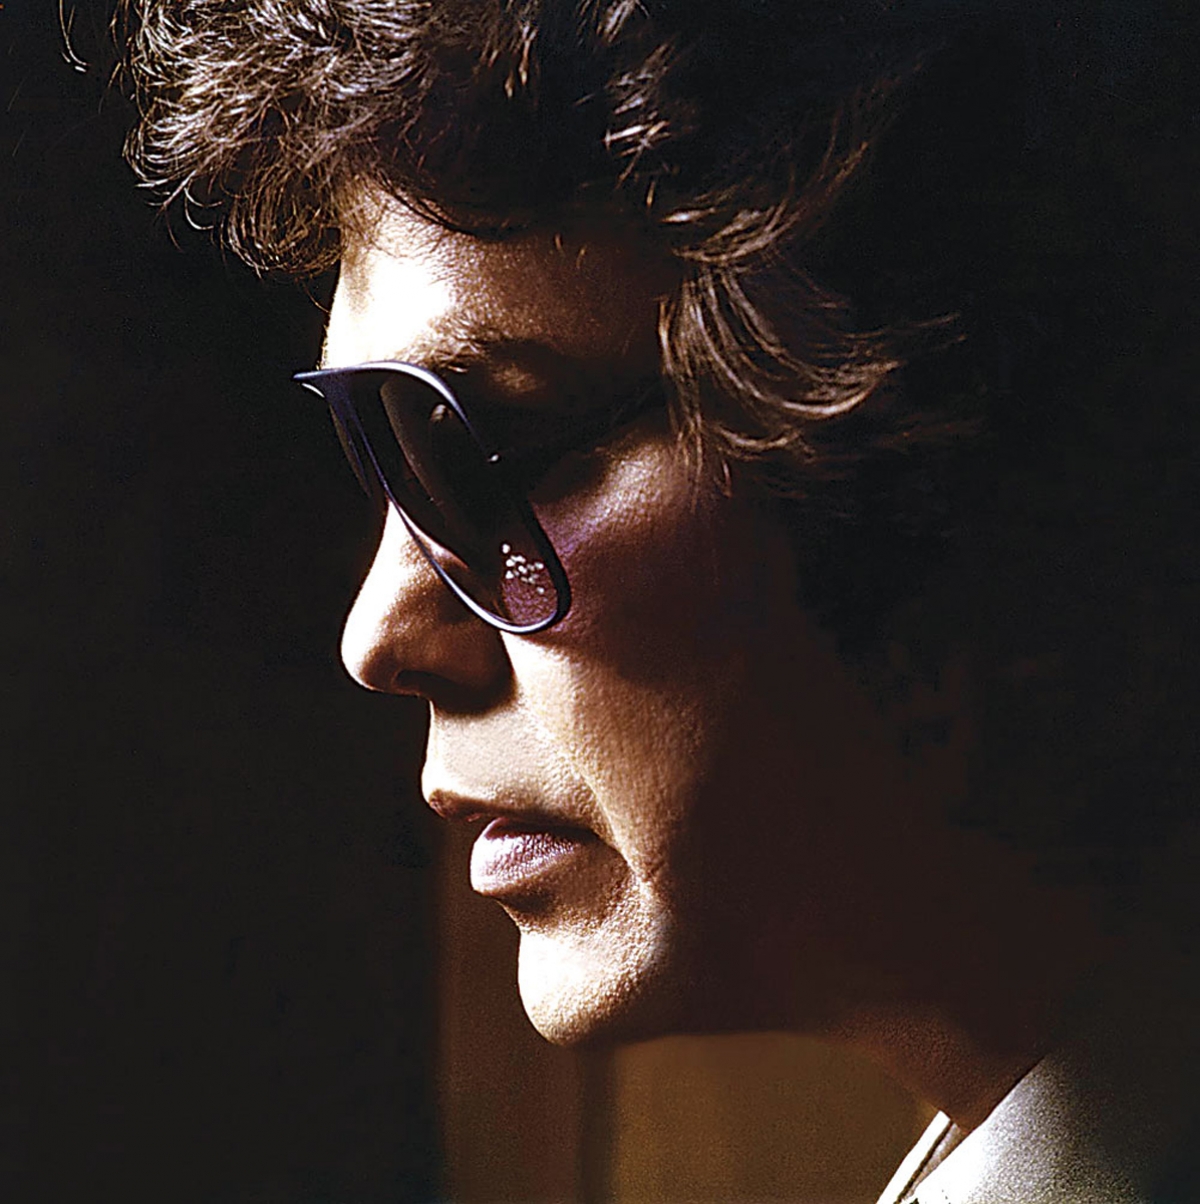 Ronnie Milsap was born Jan. 16, 1943, in Robbinsville, N.C. A congenital disorder left him almost blind, and at the age of five, he was sent to the Governor Morehead School for the Blind in Raleigh, N.C.  At the age of seven his teachers recognized that he had considerable musical talent. He began studying classical music and learned several instruments, eventually mastering the piano.  In 1976, Milsap established himself solidly as one of Country Music’s biggest stars. A string of seven No. 1 hits in a row, including “It Was Almost Like a Song,” which was the most successful single of the 1970s. It paved the way for Milsap to be named Billboard’s Artist of the Year in 1976.  Milsap won four CMA Album of the Year Awards, three CMA Male Vocalist of the Year trophies, and the coveted CMA Entertainer of the Year Award. In addition he won five Grammys for Best Male Country Vocal performance and one Grammy for Best Country Collaboration. With 40 No. 1 hits and more than 35 million albums sold, Milsap remains one of Country Music’s most successful and beloved crossover artists.